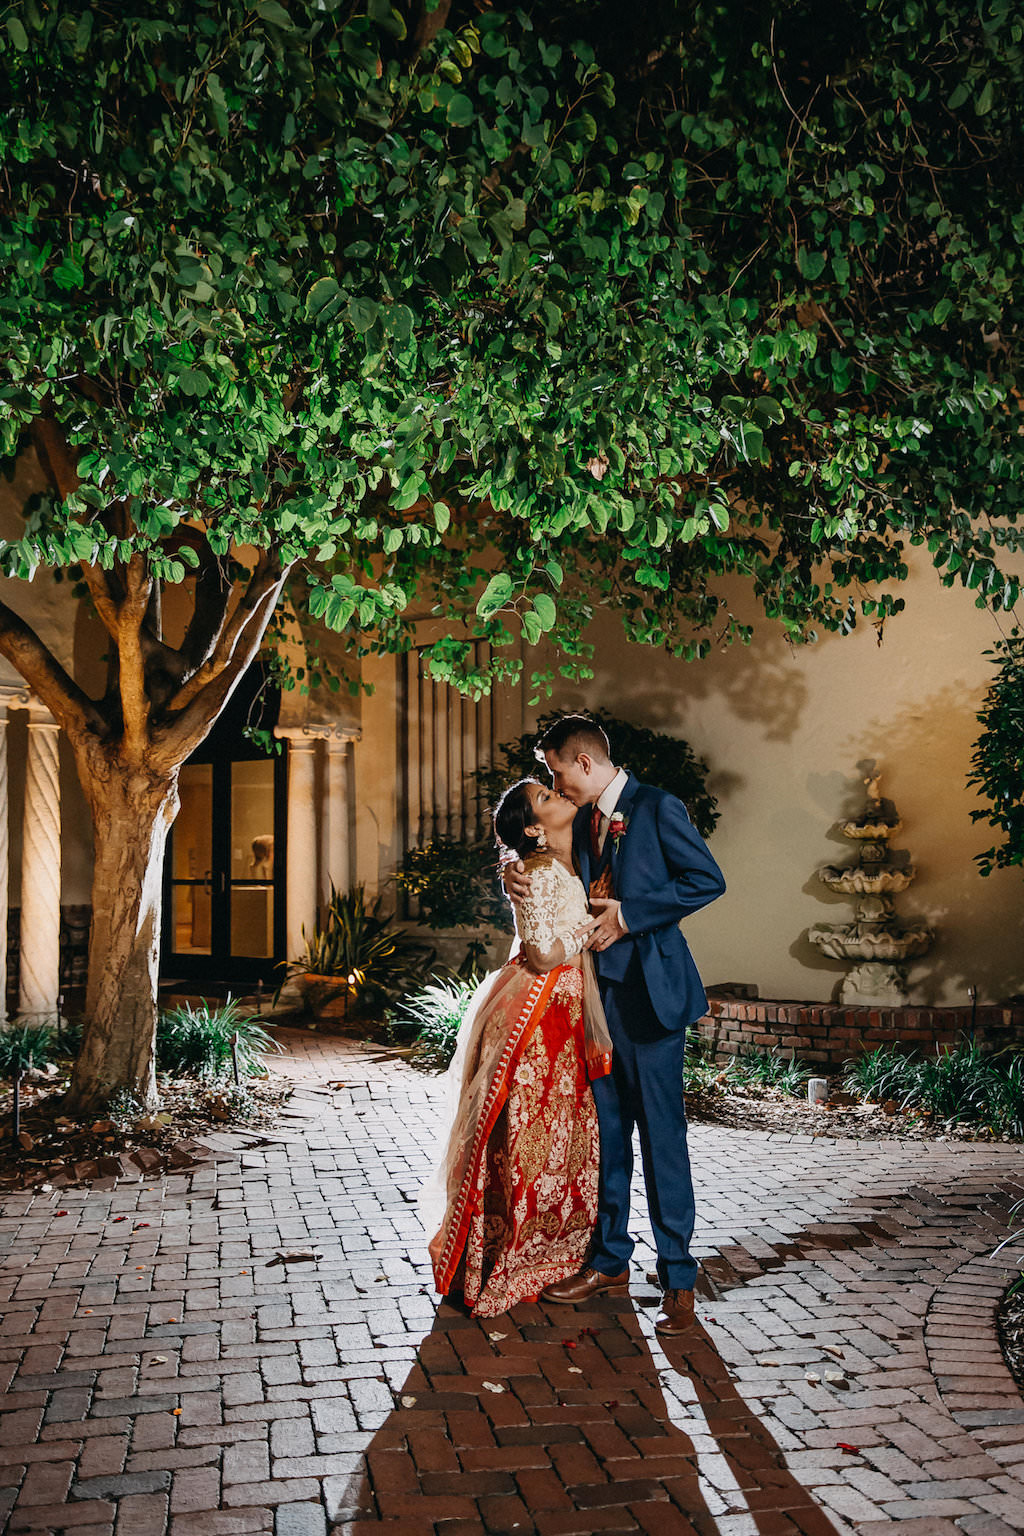 Modern Indian Wedding Courtyard Garden Nighttime Outdoor Wedding Portrait, Bride in Red and Gold with White Saree, Groom in Blue Suit | St Pete Wedding Photographer Rad Red Creative | Venue St Petersburg Museum of Fine Arts | Menswear Sacino's Formalwear